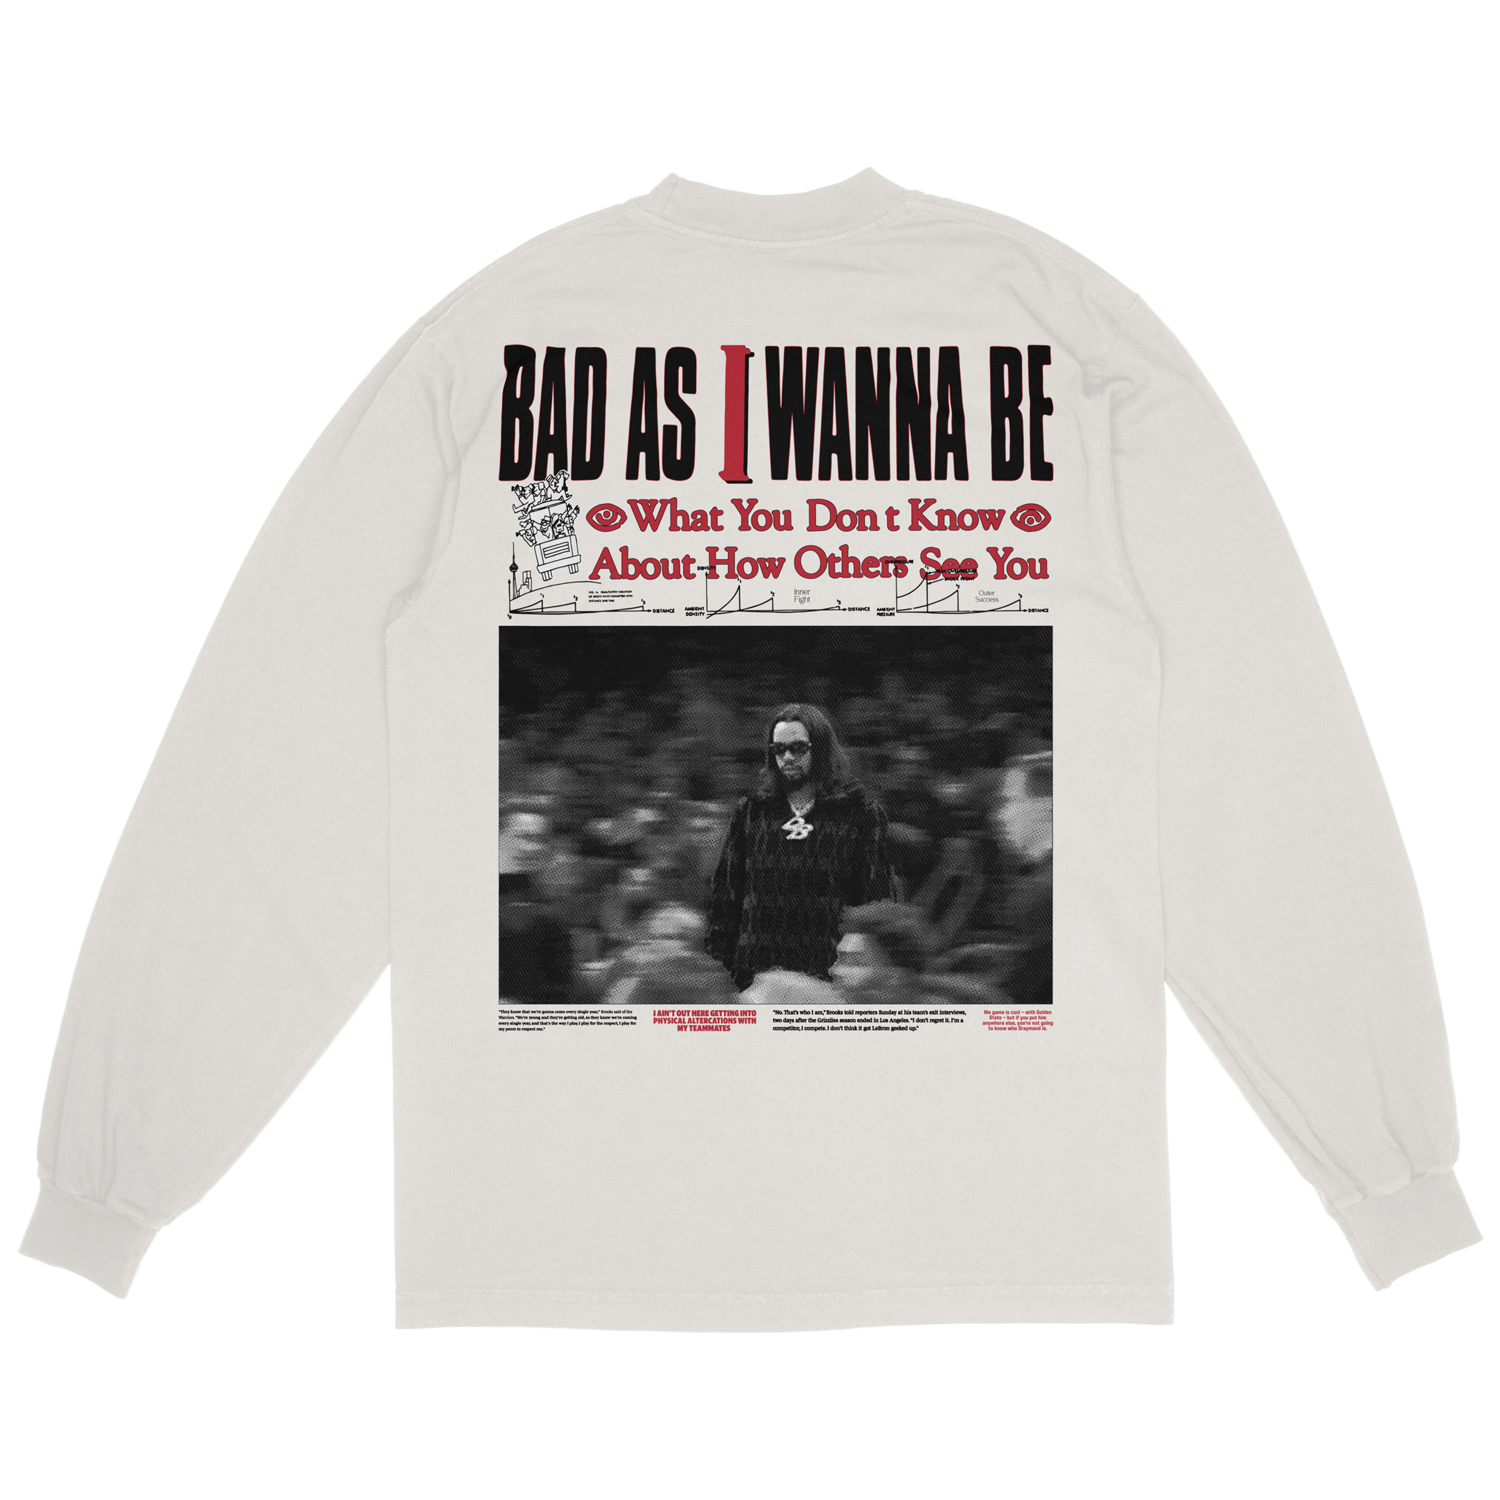 back side of white longsleeve shirt with the text "bad as i wanna be" and "what you dont know about how others see you" and an image of dillon brooks